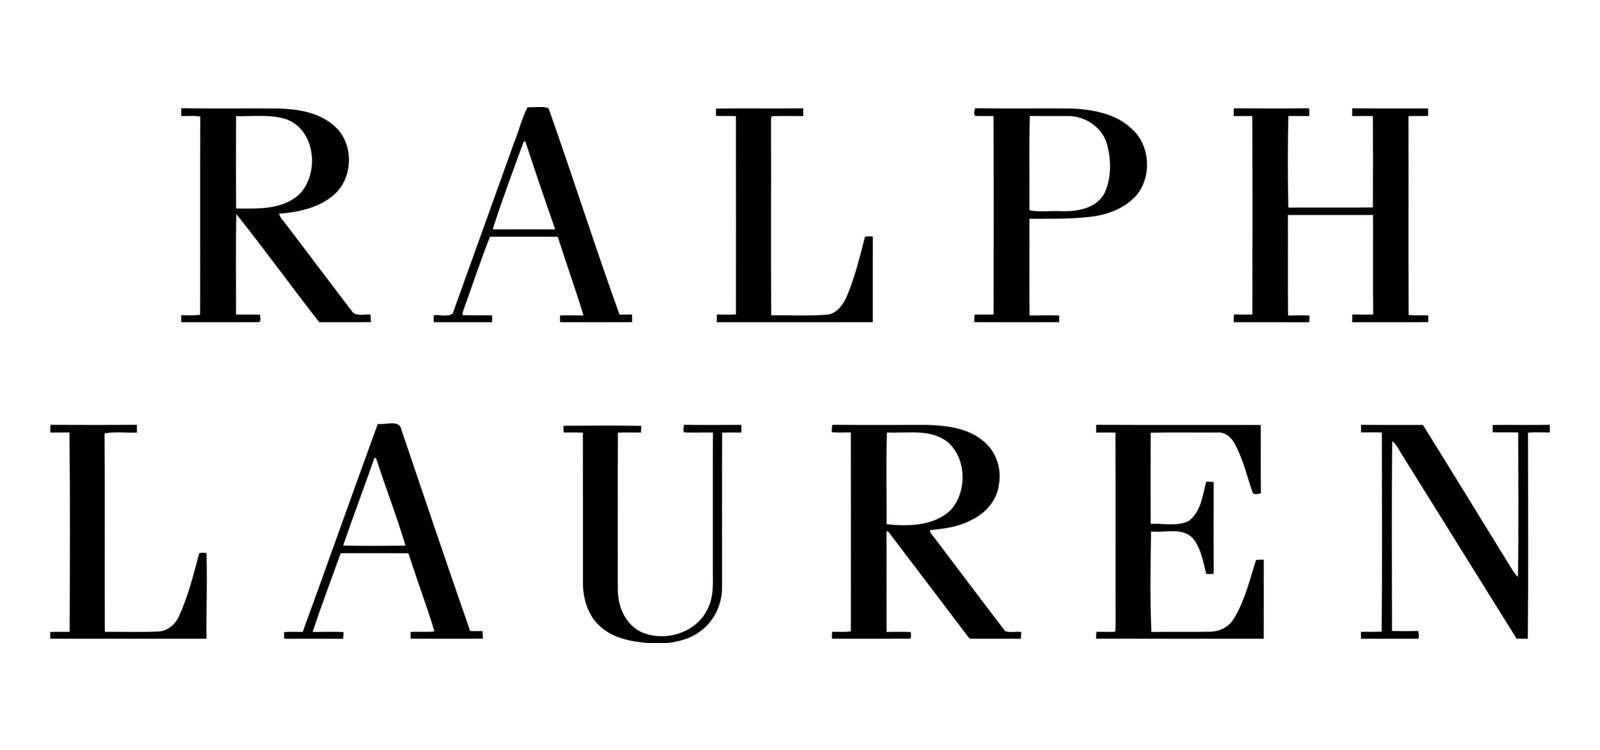 Symbol Of Polo Ralph Lauren - The Flagship Brand Of The Company Stock  Photo, Picture and Royalty Free Image. Image 15985971.